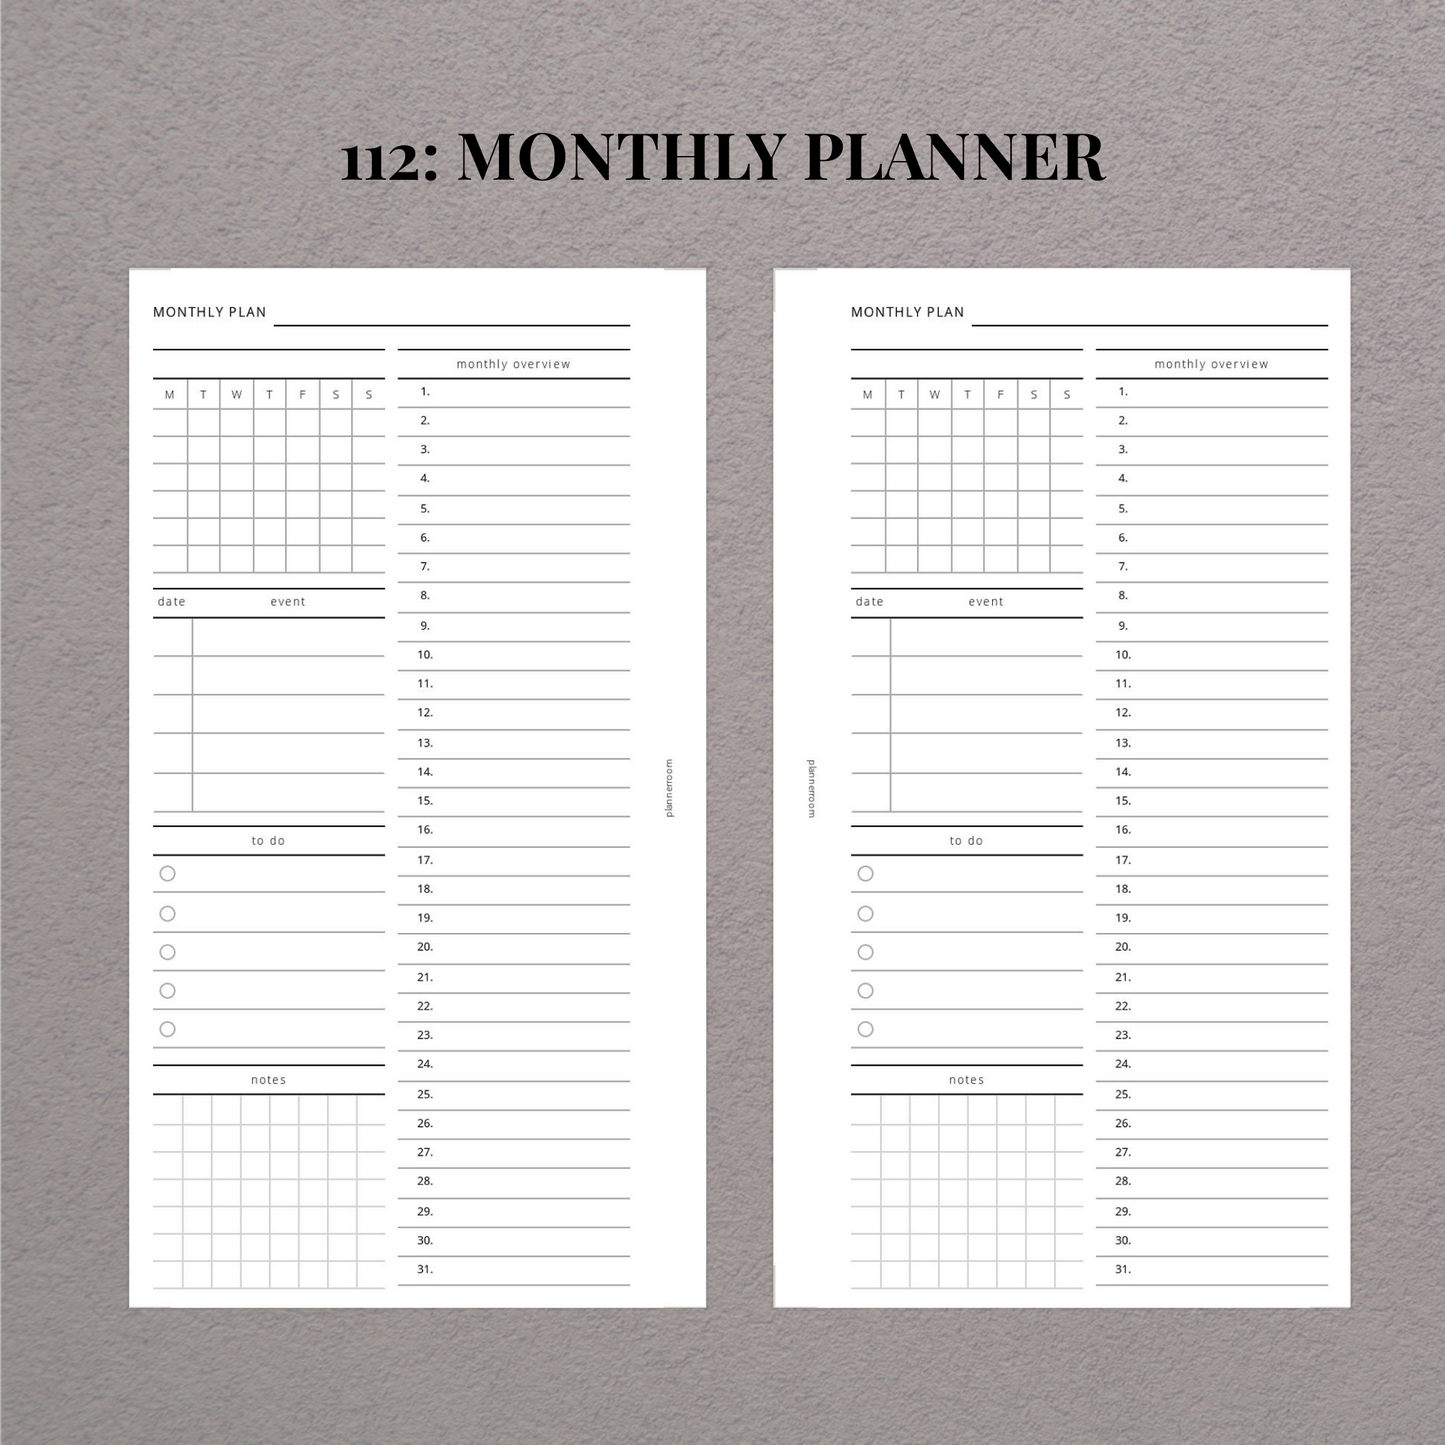 Monthly planner | Printable inserts | 112